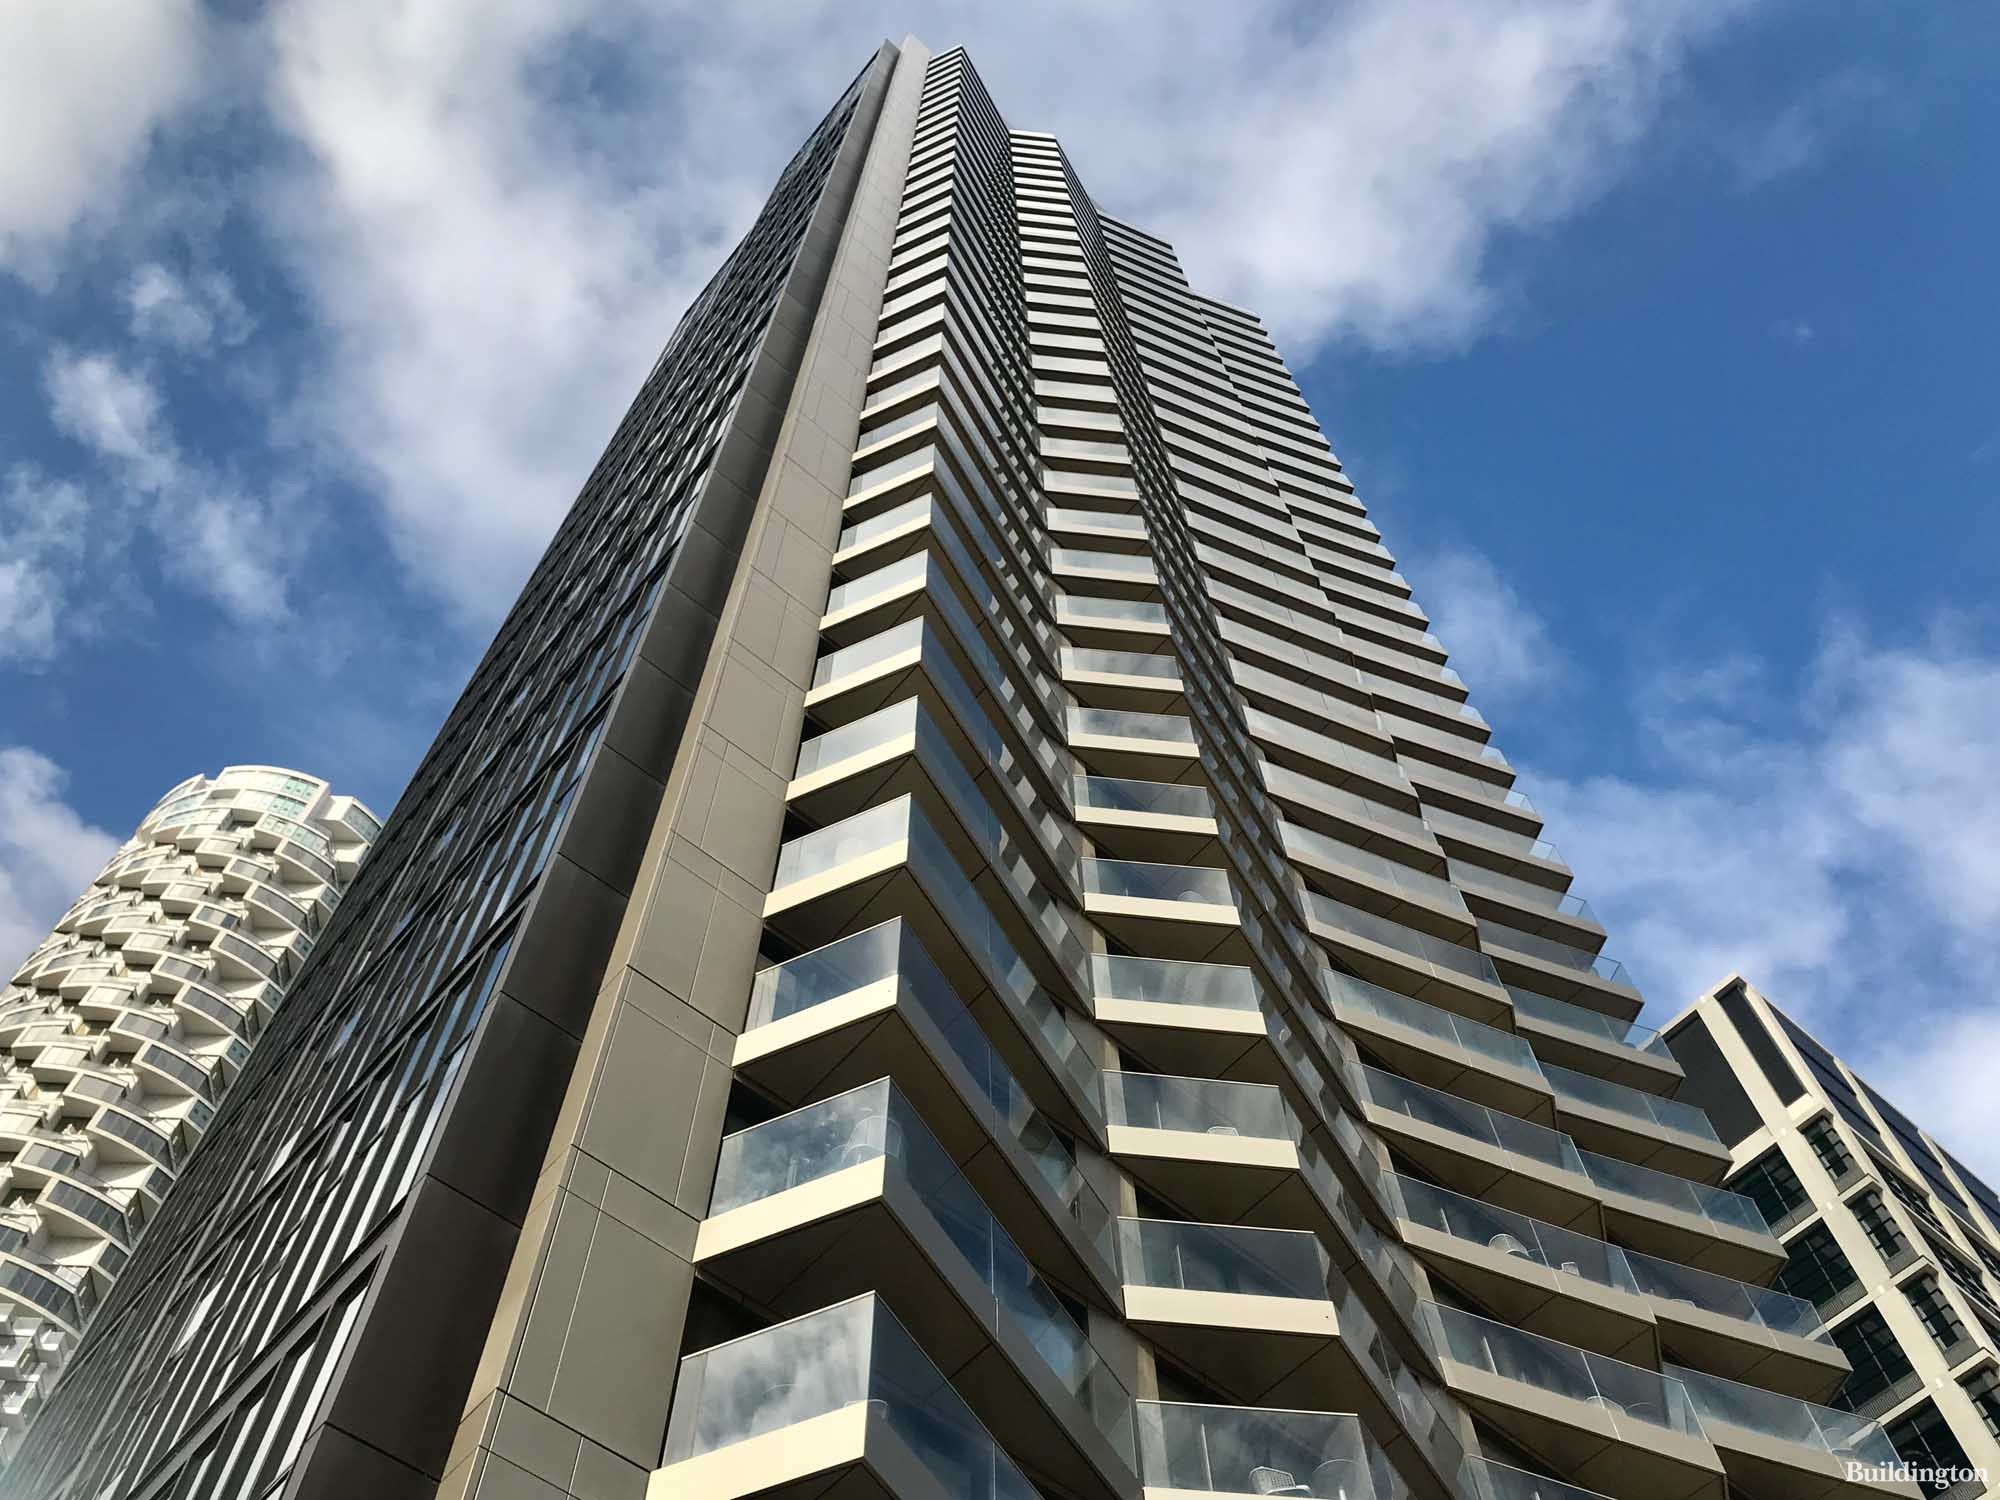 37-storey 10 George Street offers new homes for rent in Wood Wharf, London E14.